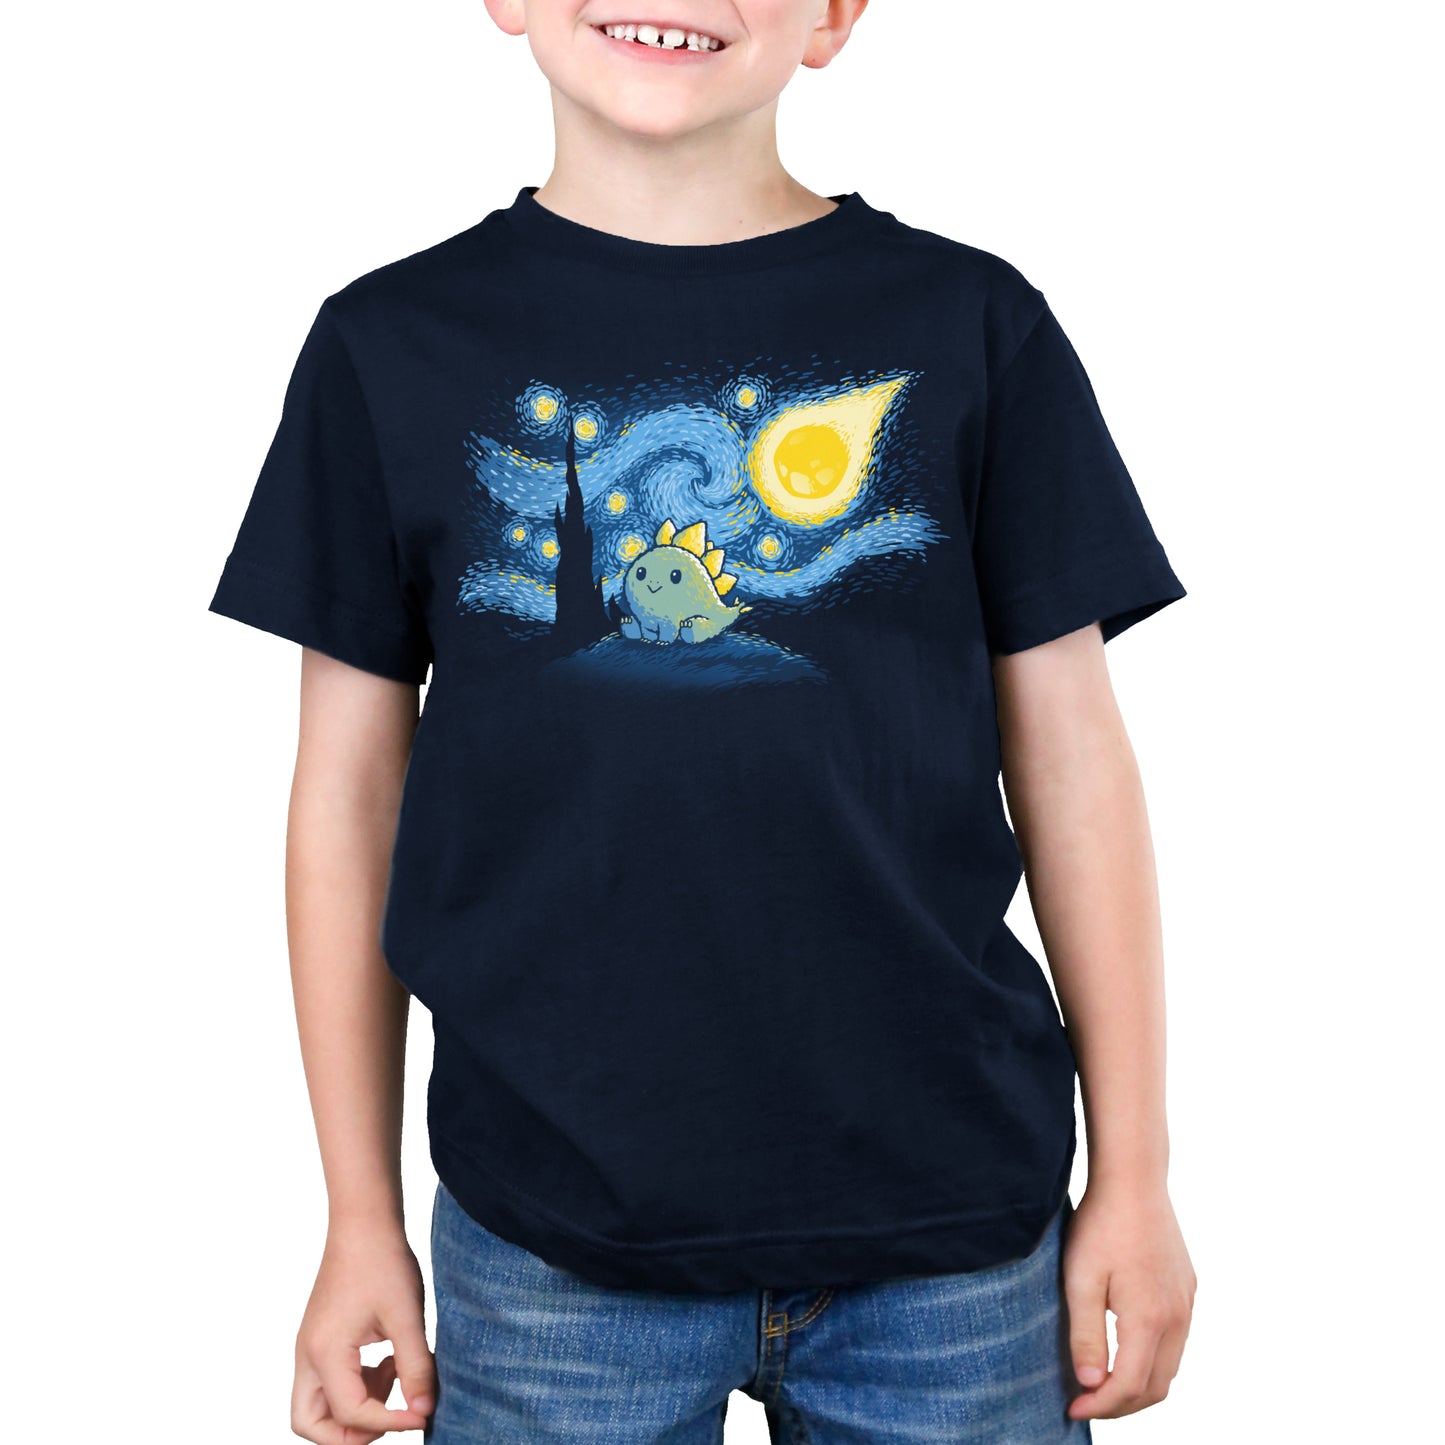 A young boy wearing a navy blue t-shirt featuring the Stego Night design by TeeTurtle.